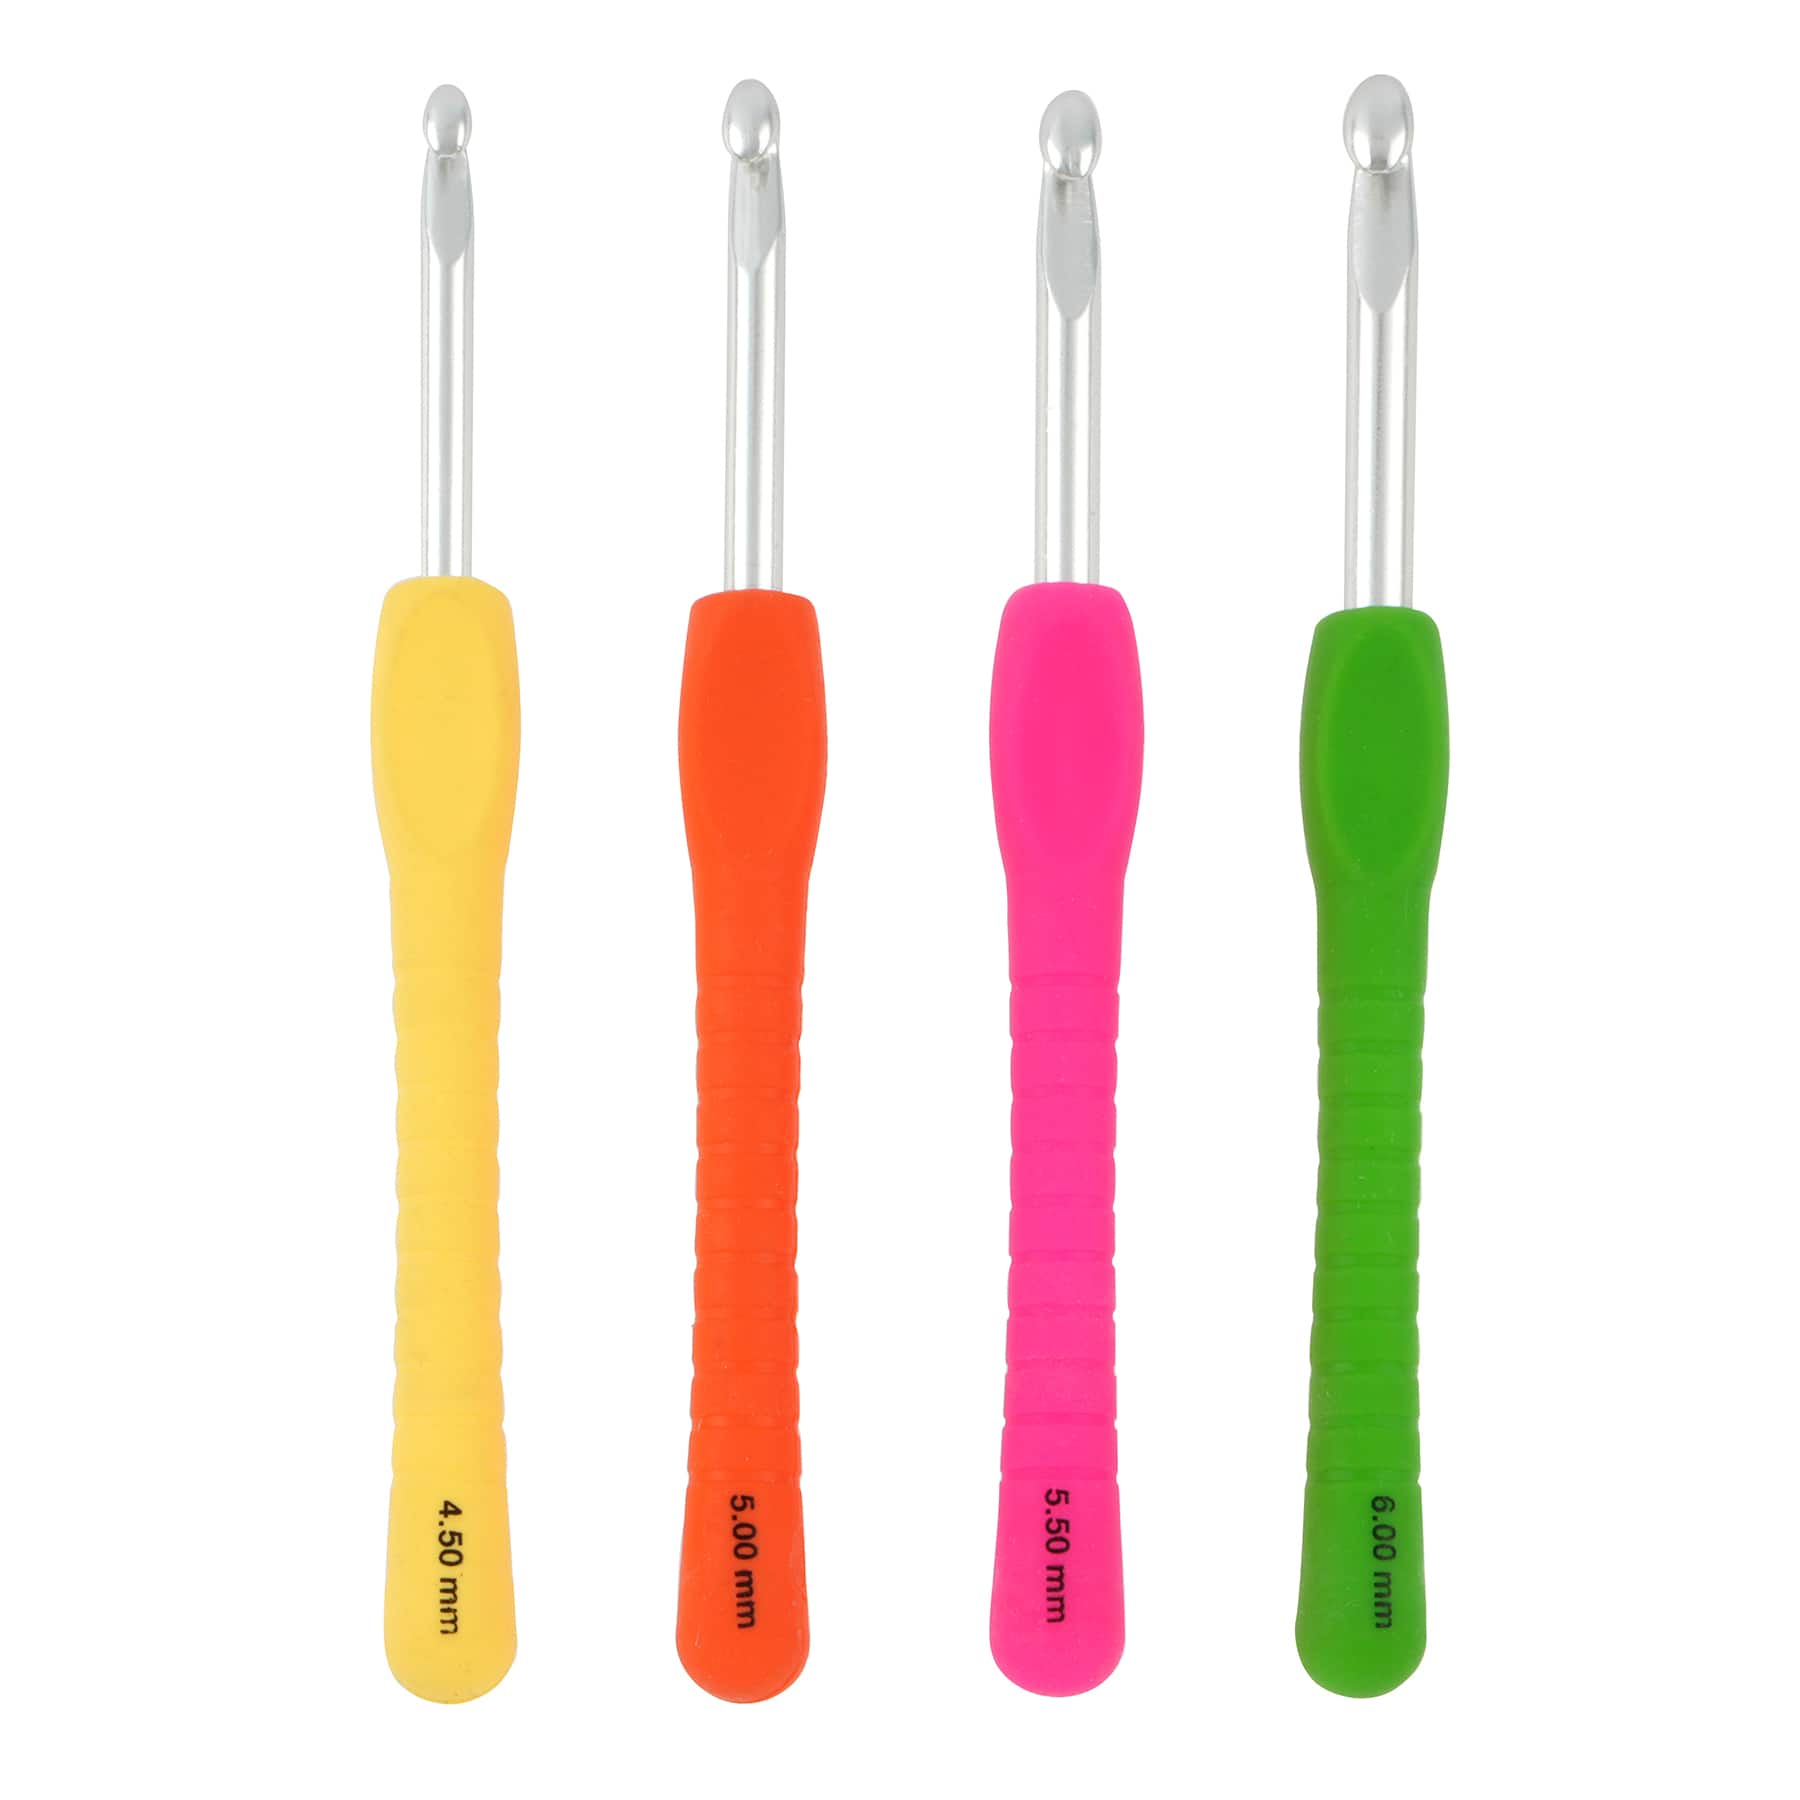 Loops & Threads E to J Anodized Crochet Hook Set - 6 ct